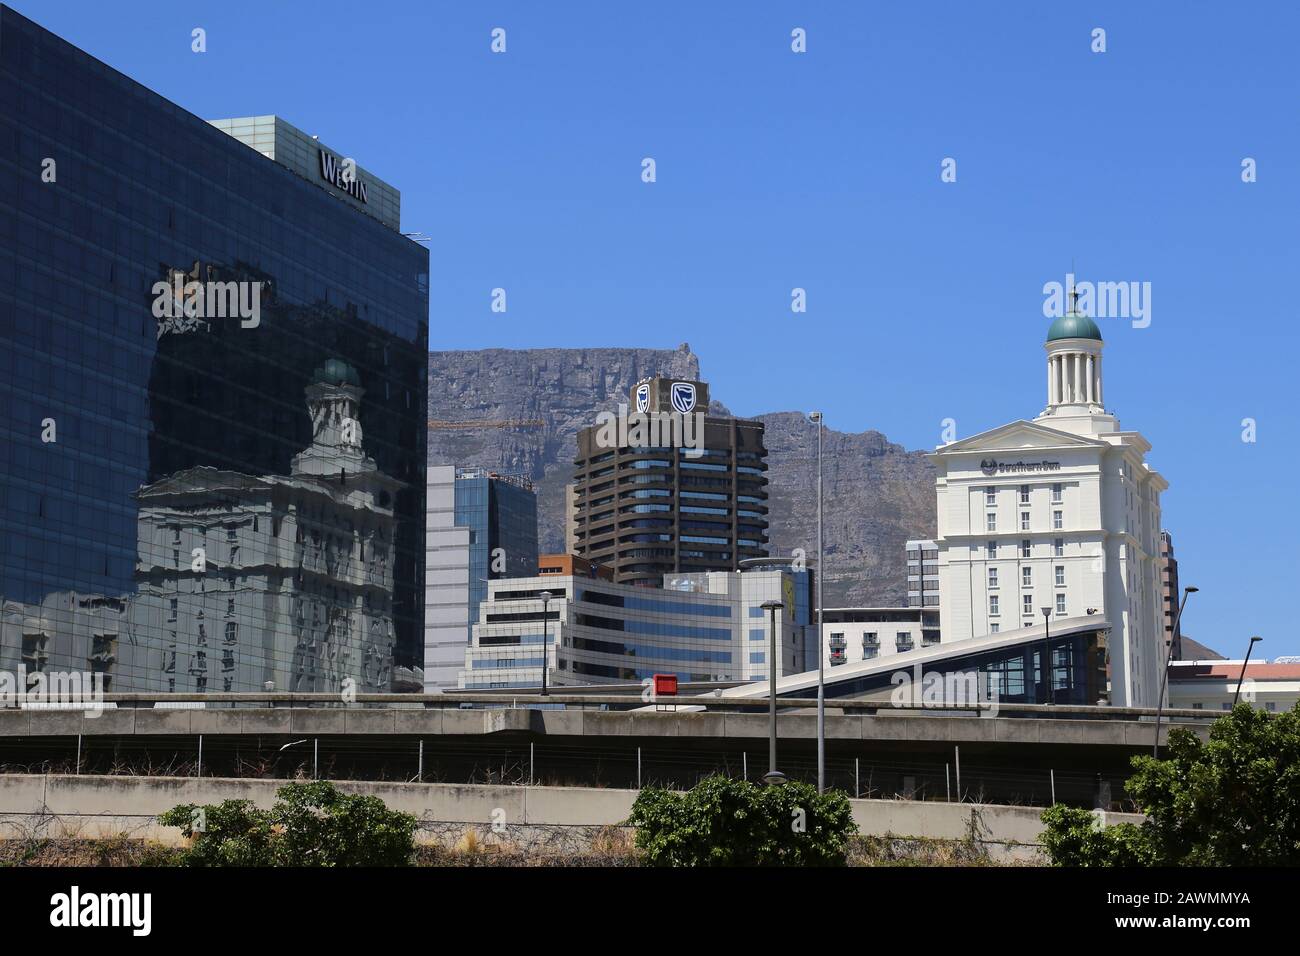 Central Business District seen from V&A (Victoria and Alfred) Waterfront, Cape Town, Table Bay, Western Cape Province, South Africa, Africa Stock Photo